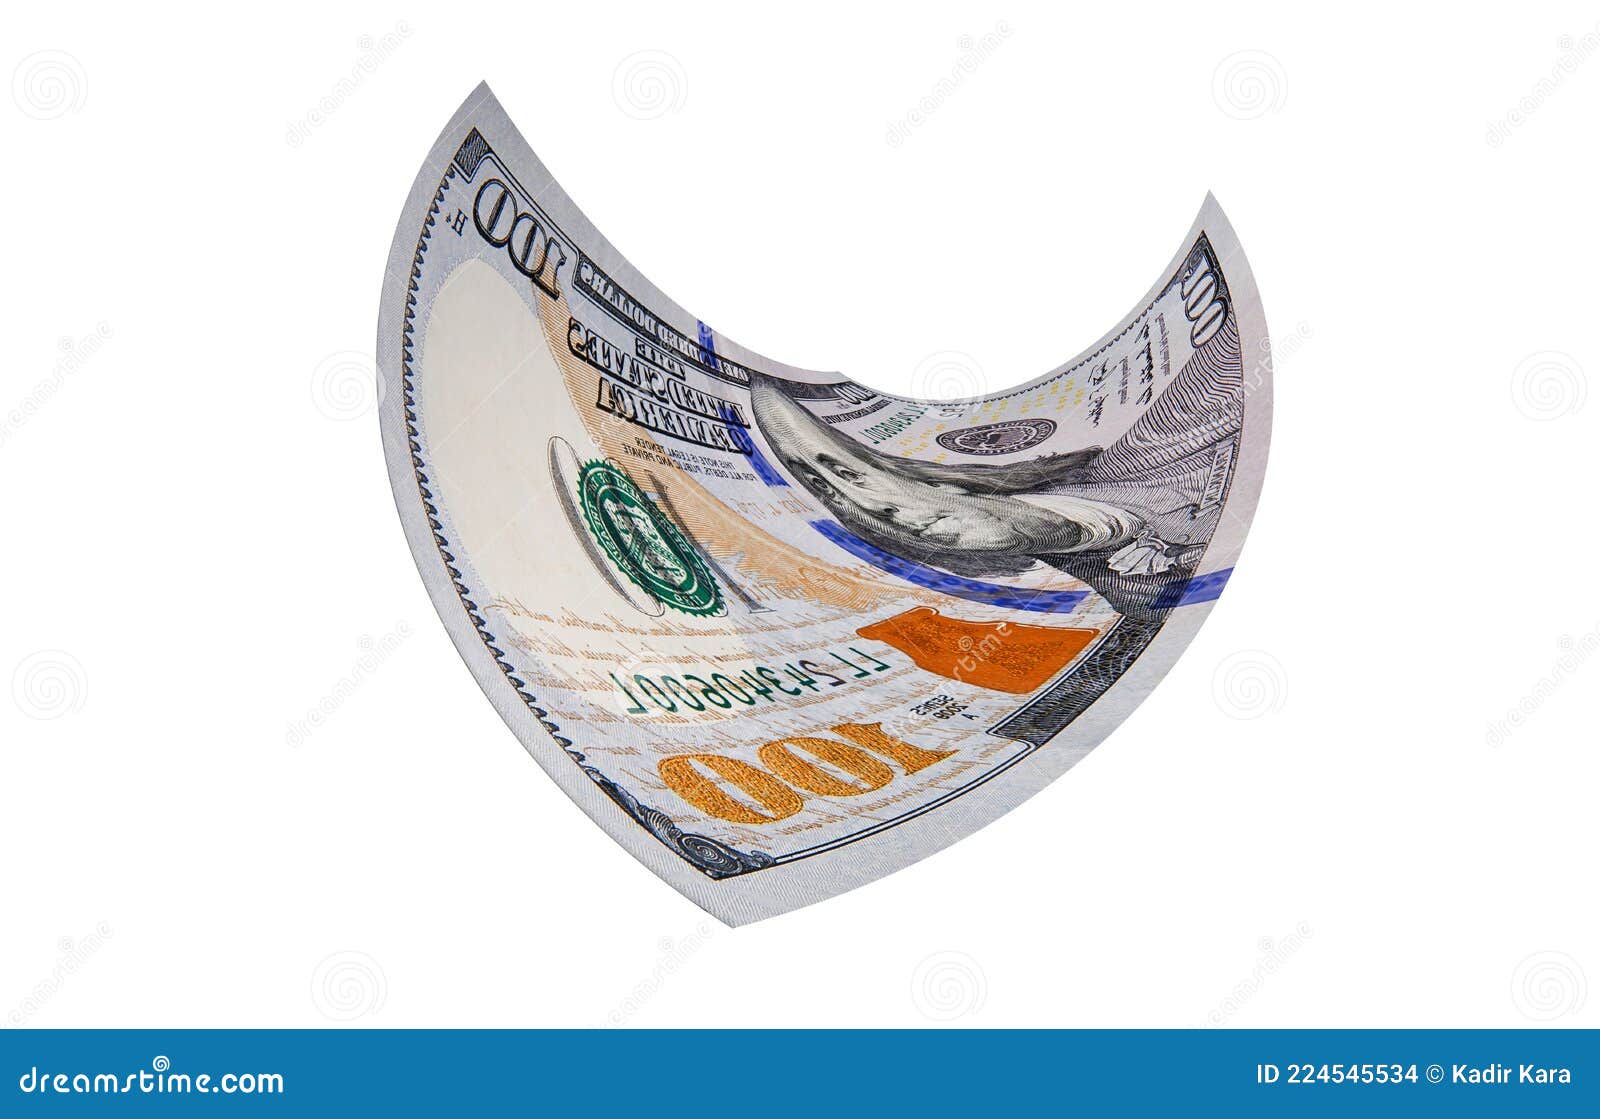 New Flying US Dollar Bill, Official US Dollar Used for Trade in America ...